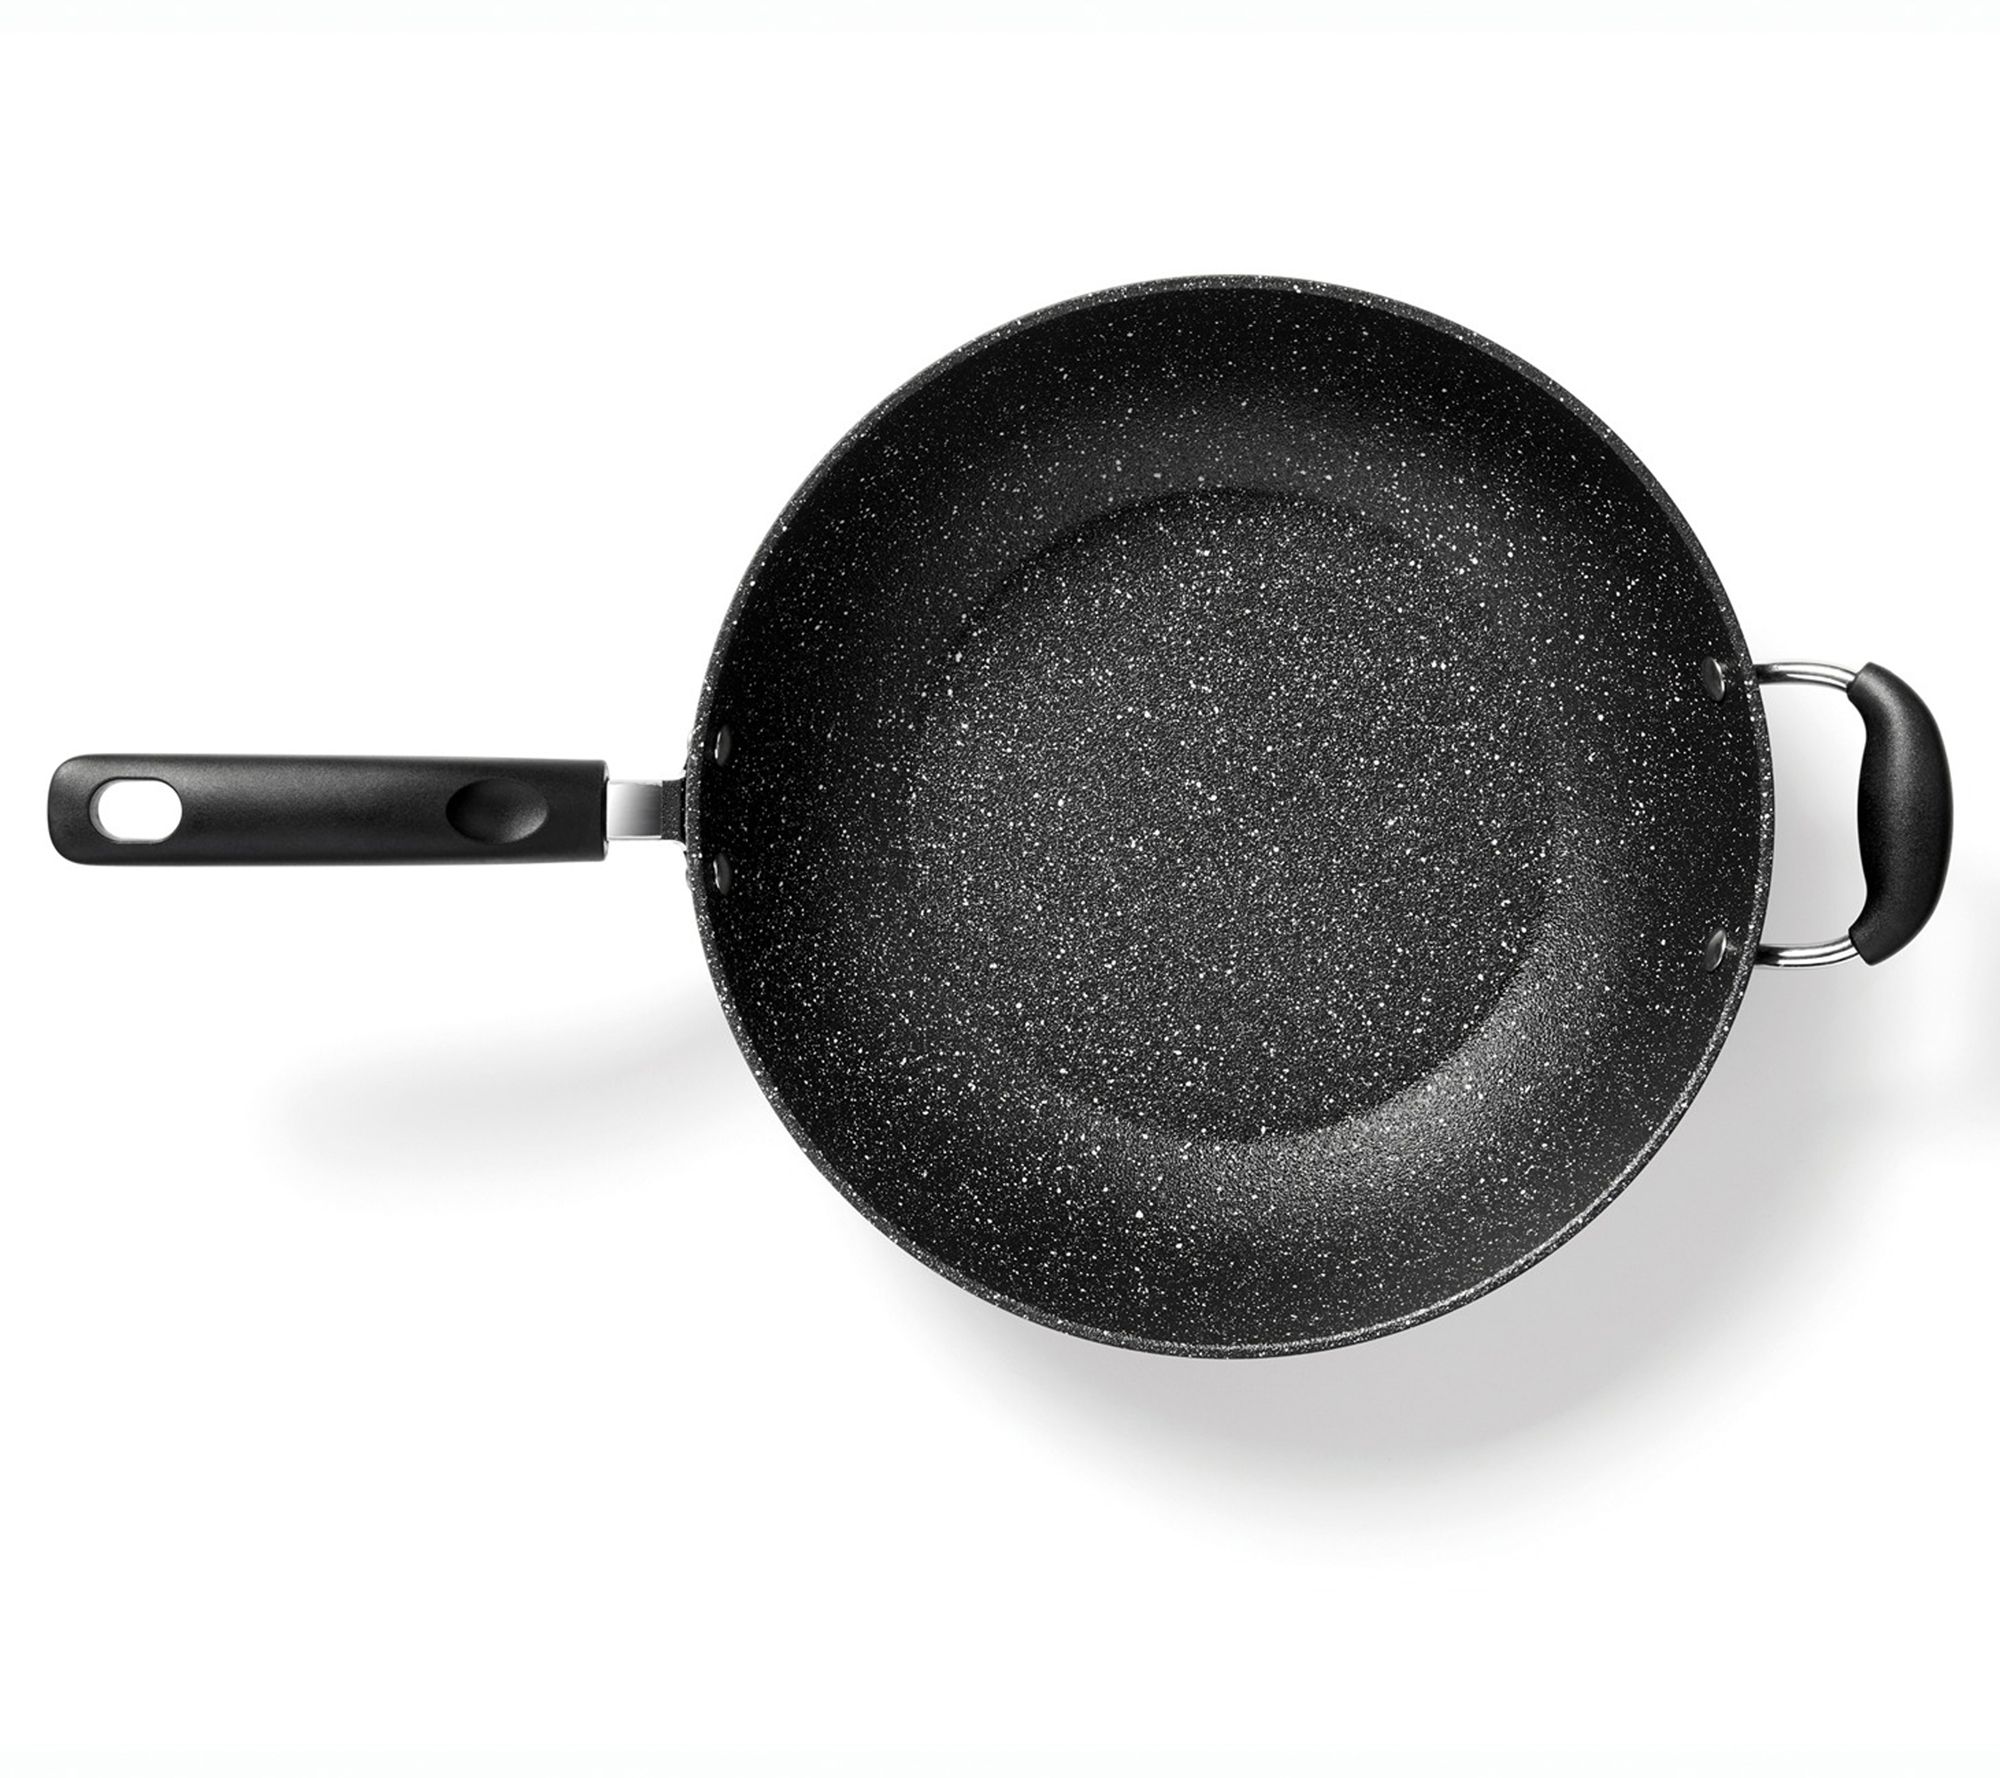 THE ROCK by Starfrit--Anyone using these pans? - Cookware - Hungry